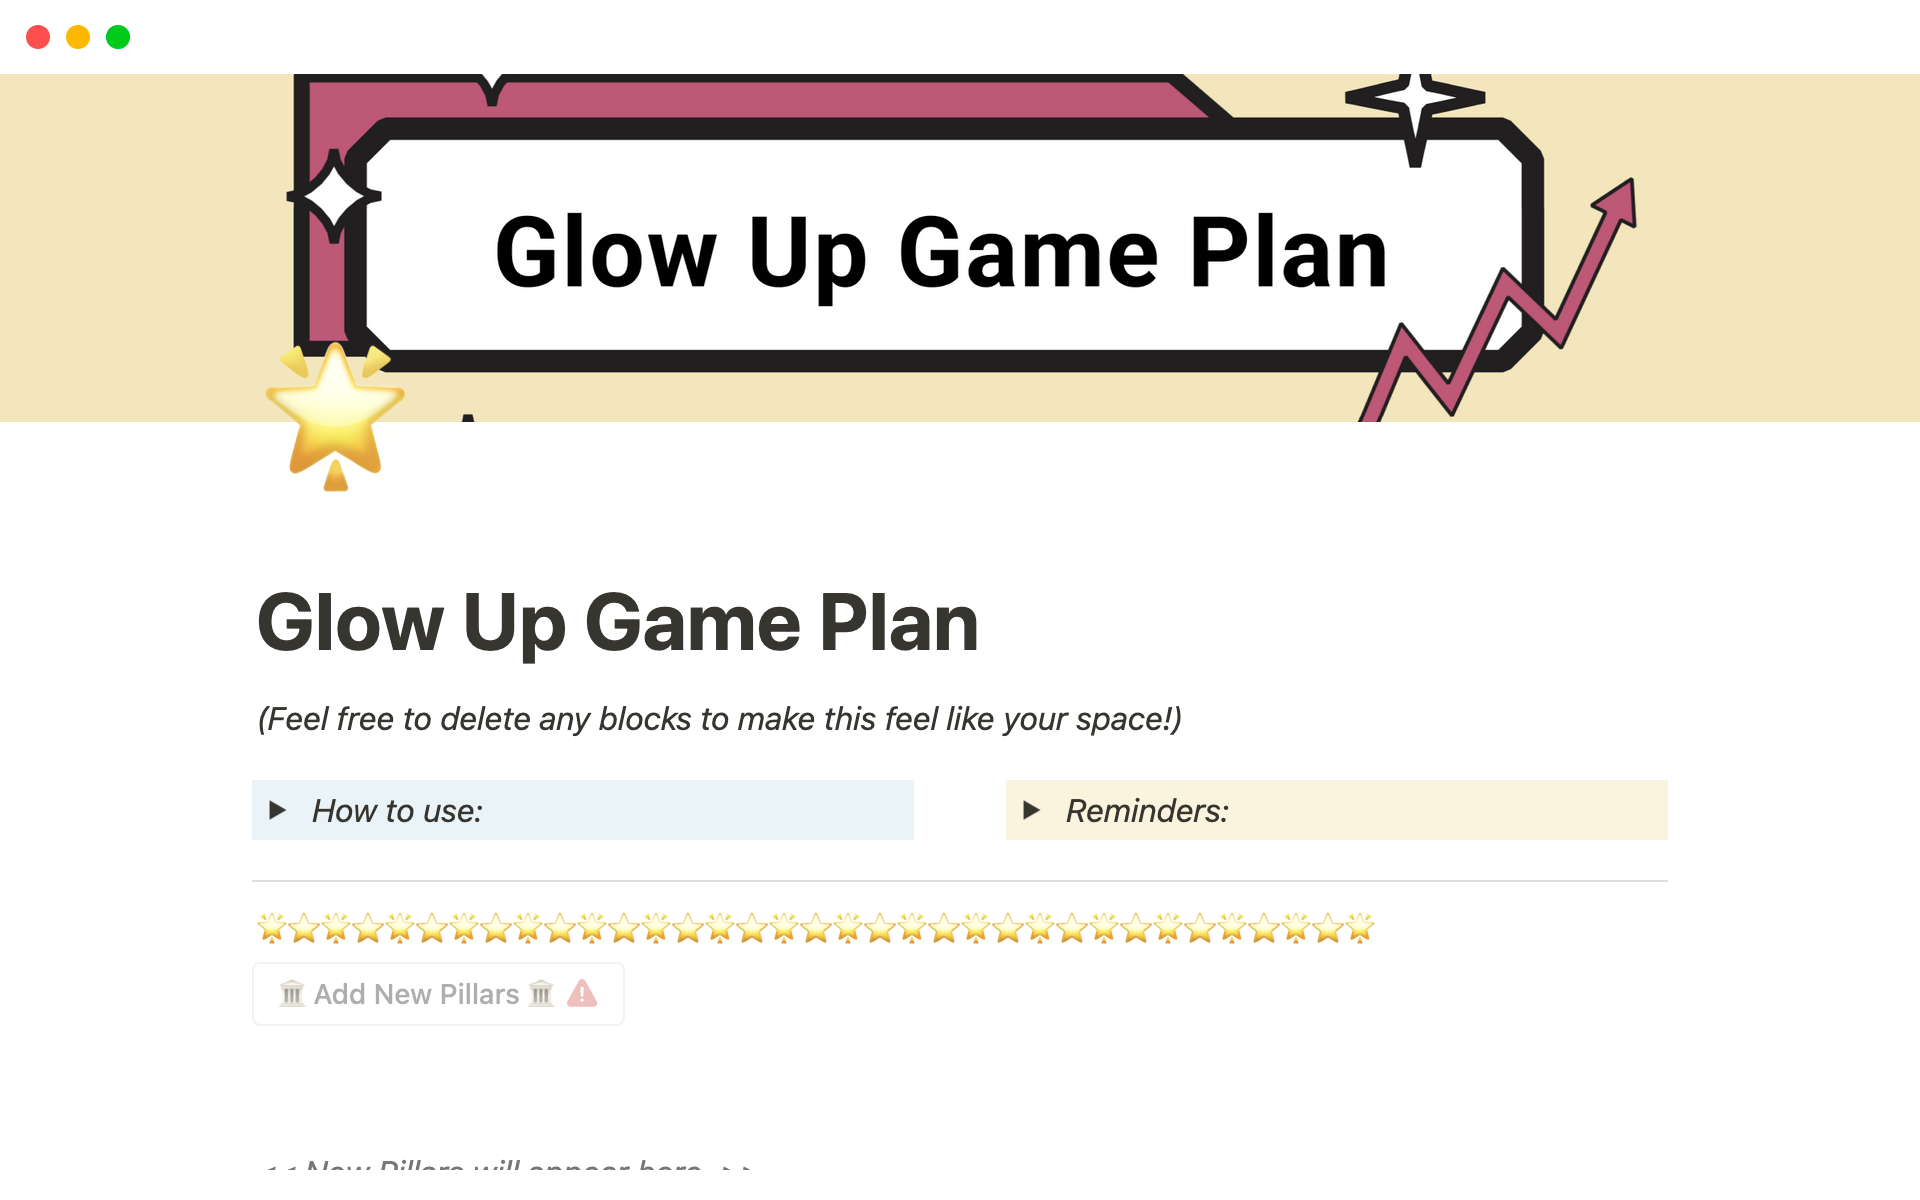 Level up your life with the Glow Up Game Plan - a Notion template to assist you through your personal growth journey!